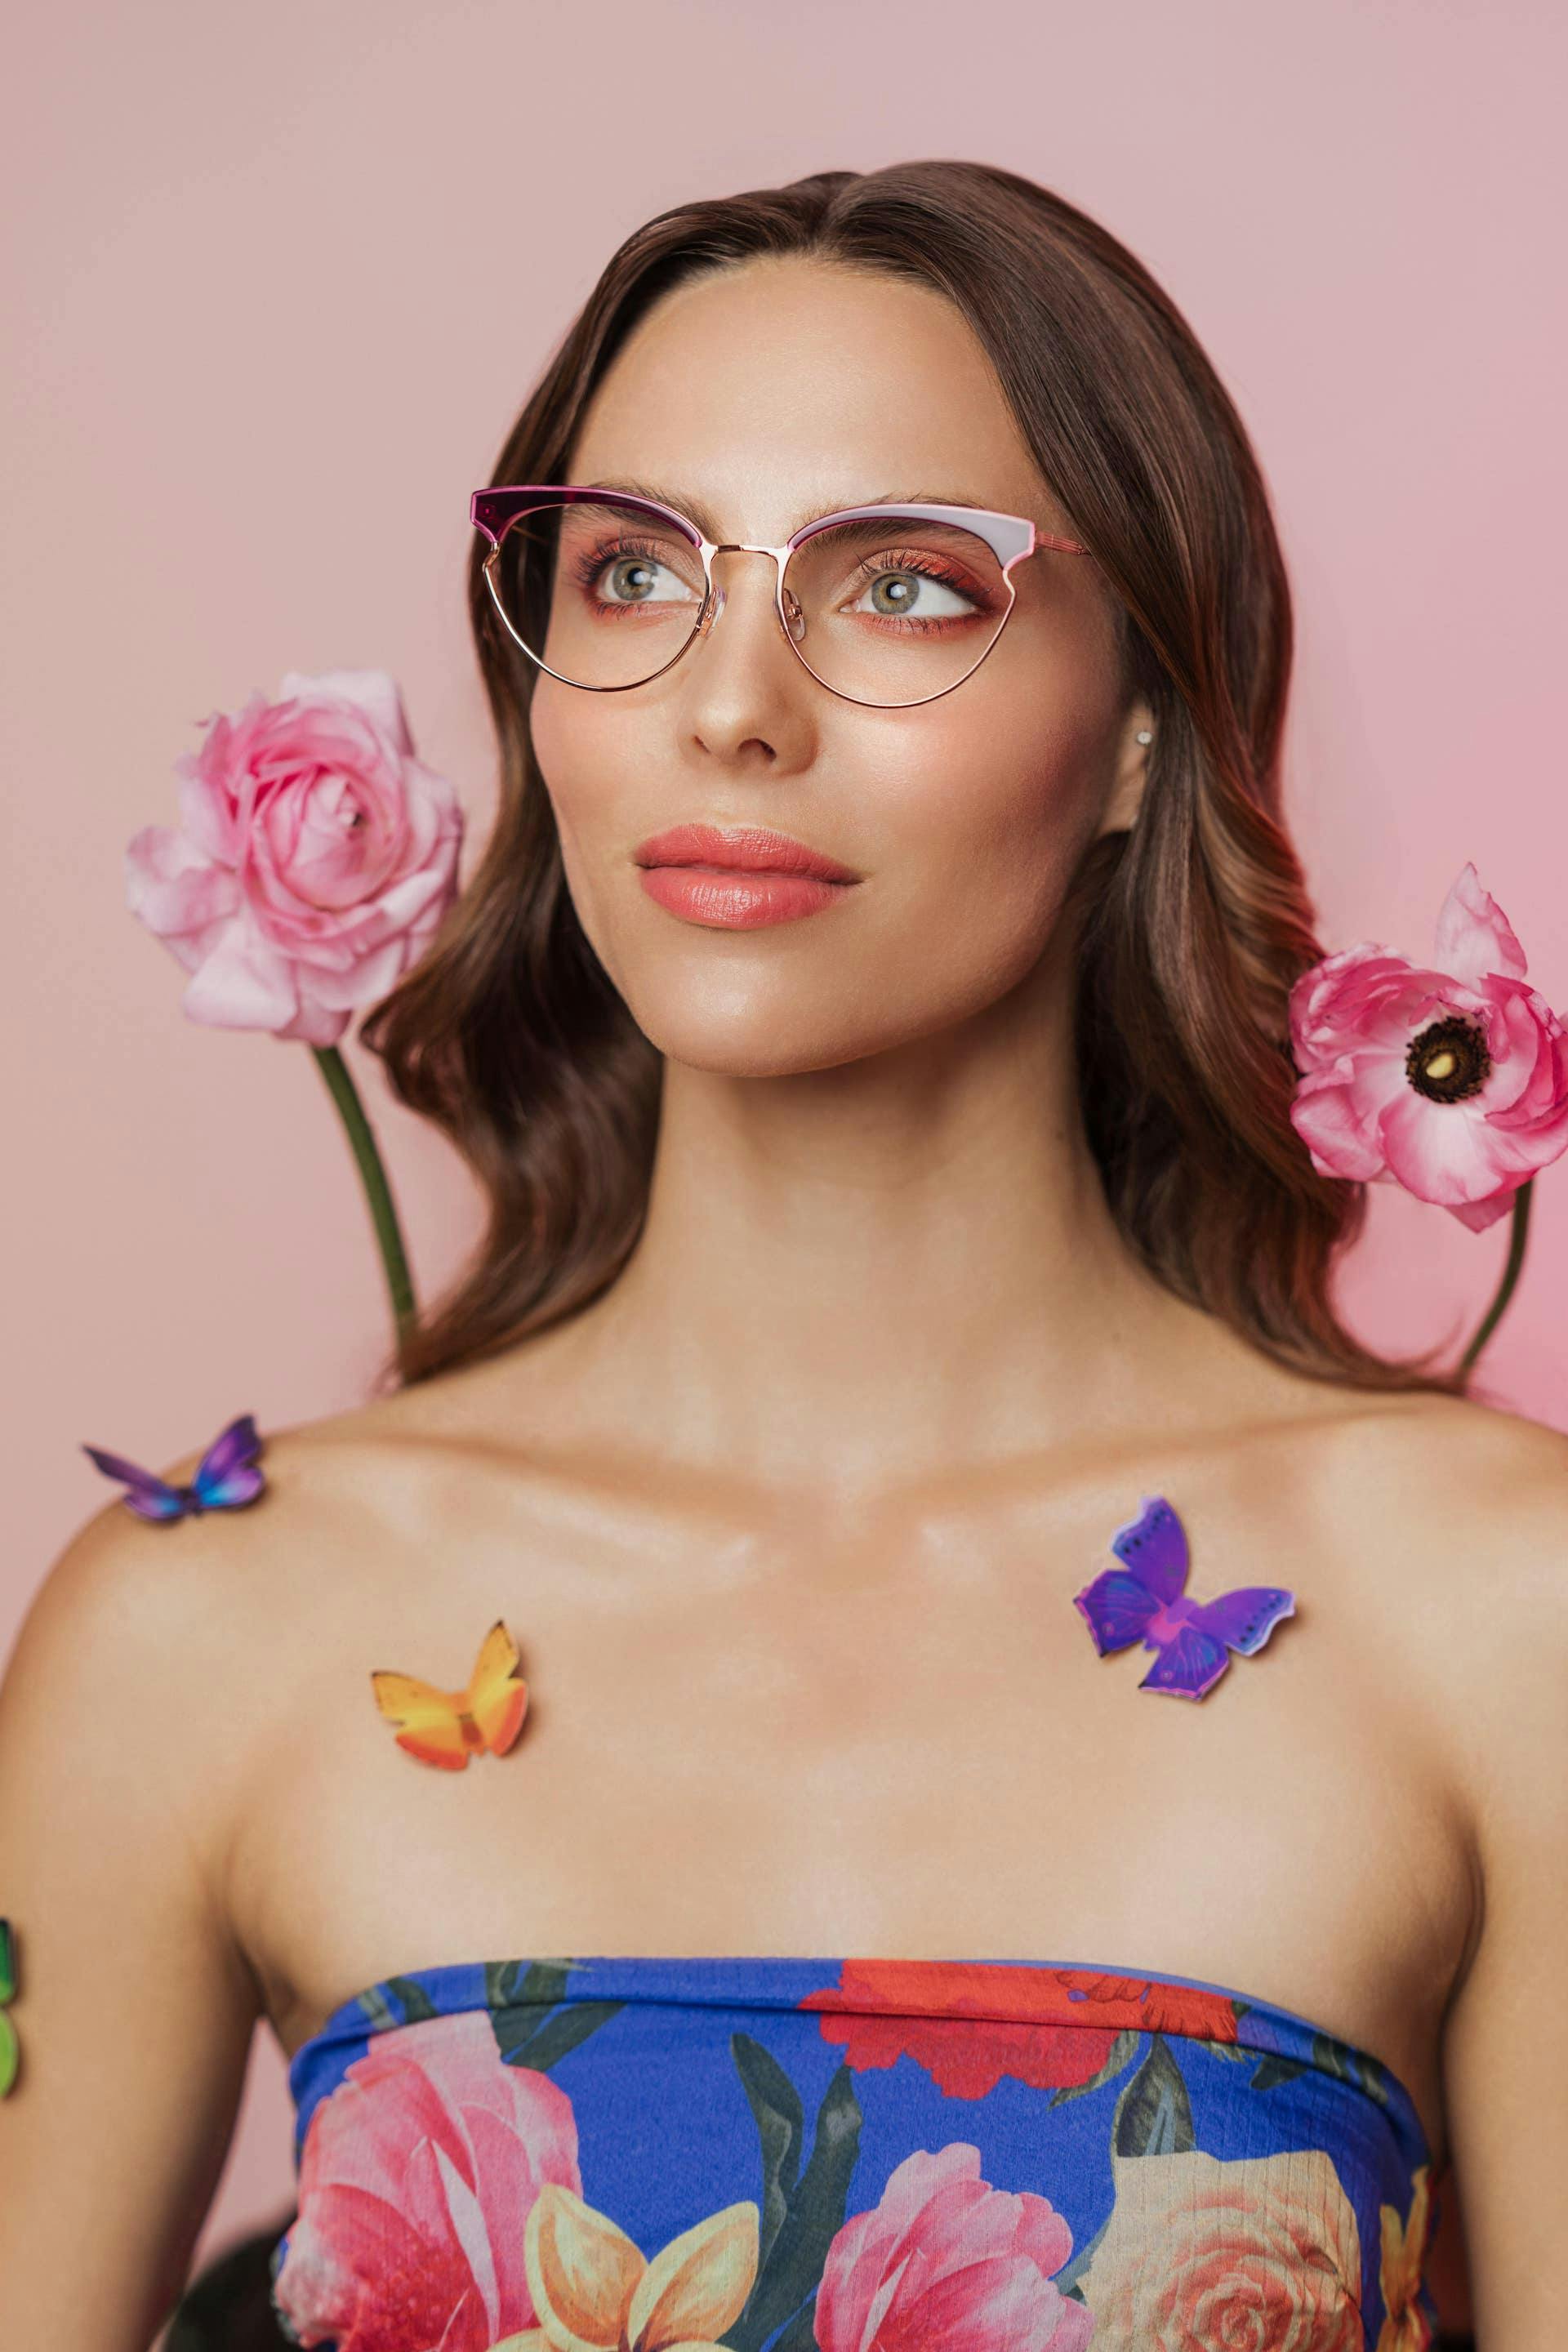 A woman modeling a pair of RACHEL Rachel Roy glasses, wearing a floral outfit on pink background.